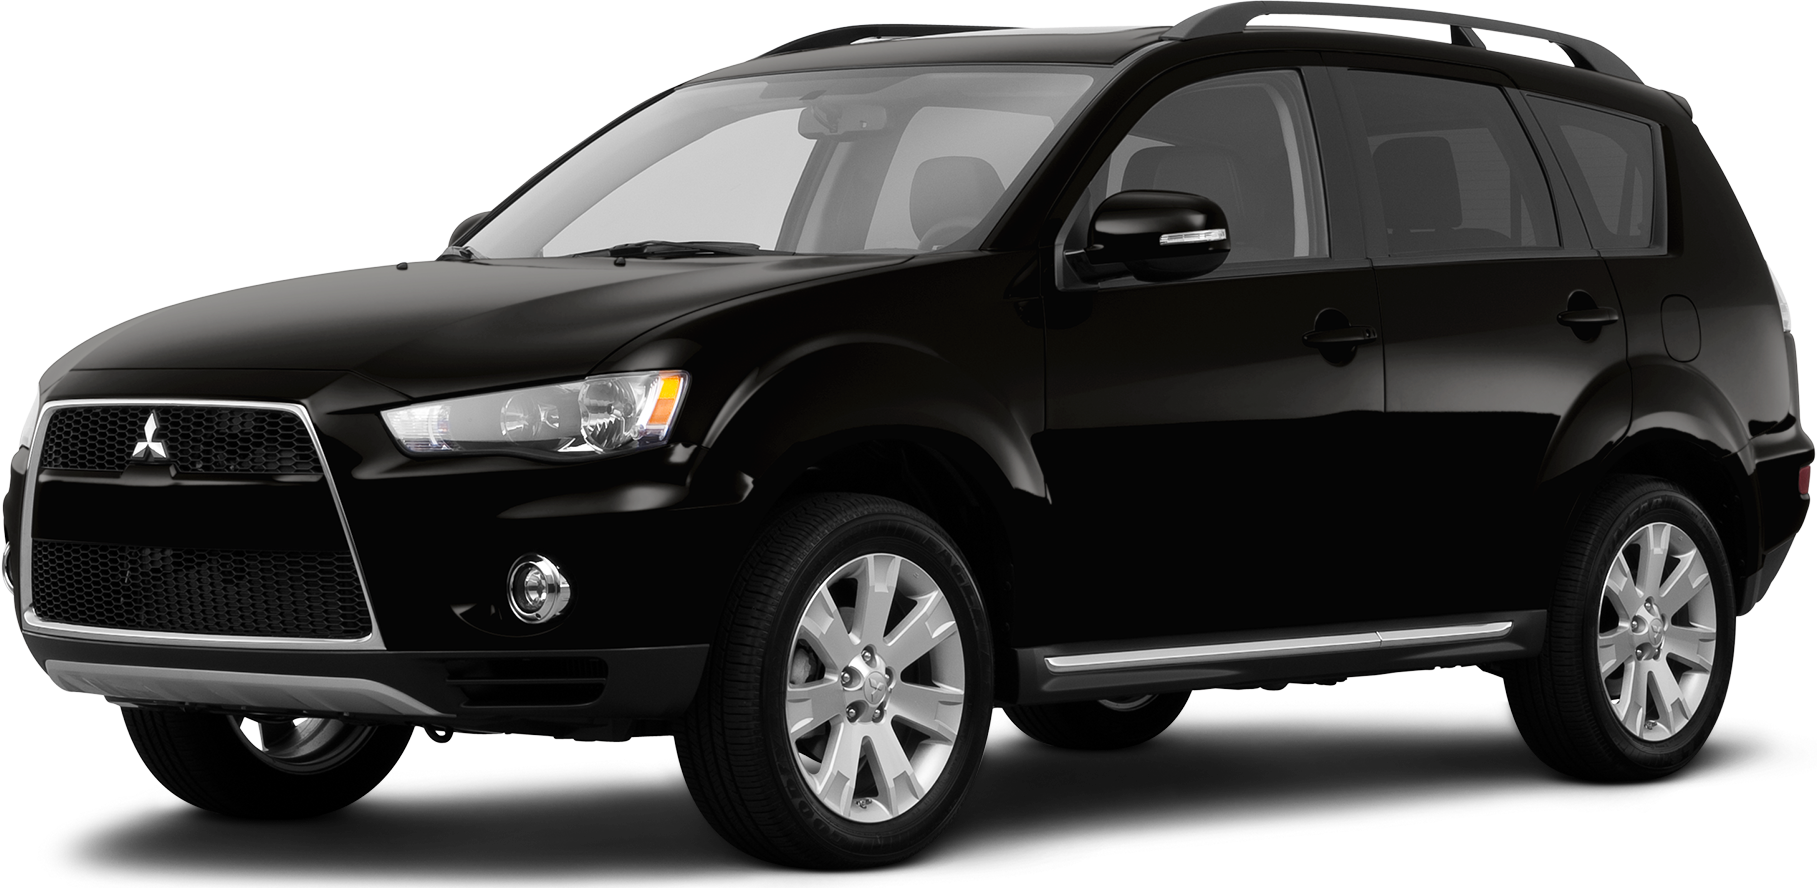 2013 Mitsubishi Outlander Values And Cars For Sale Kelley Blue Book